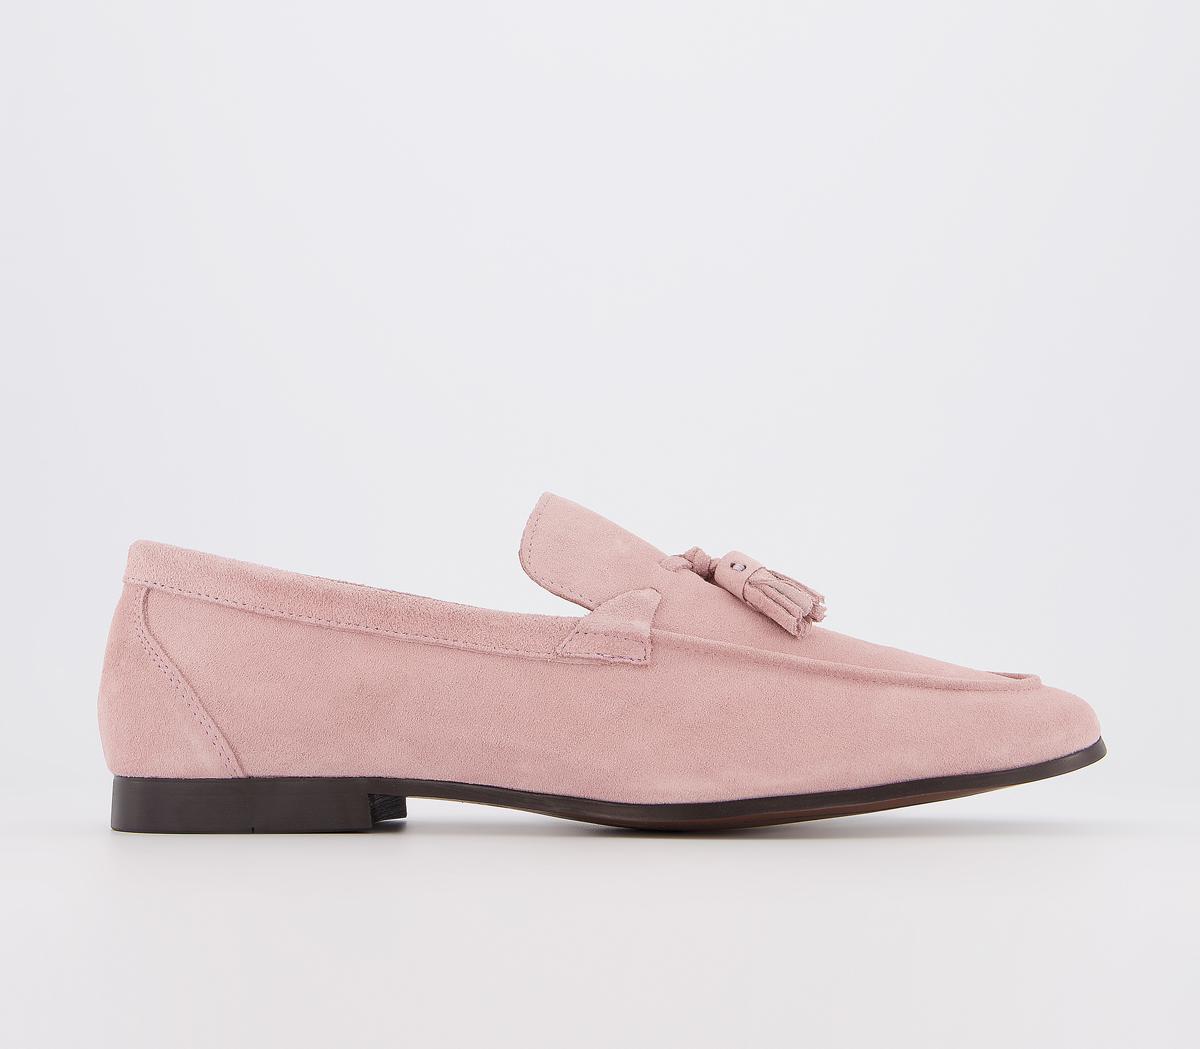 Office Clive Tassel Loafers Pink Suede 